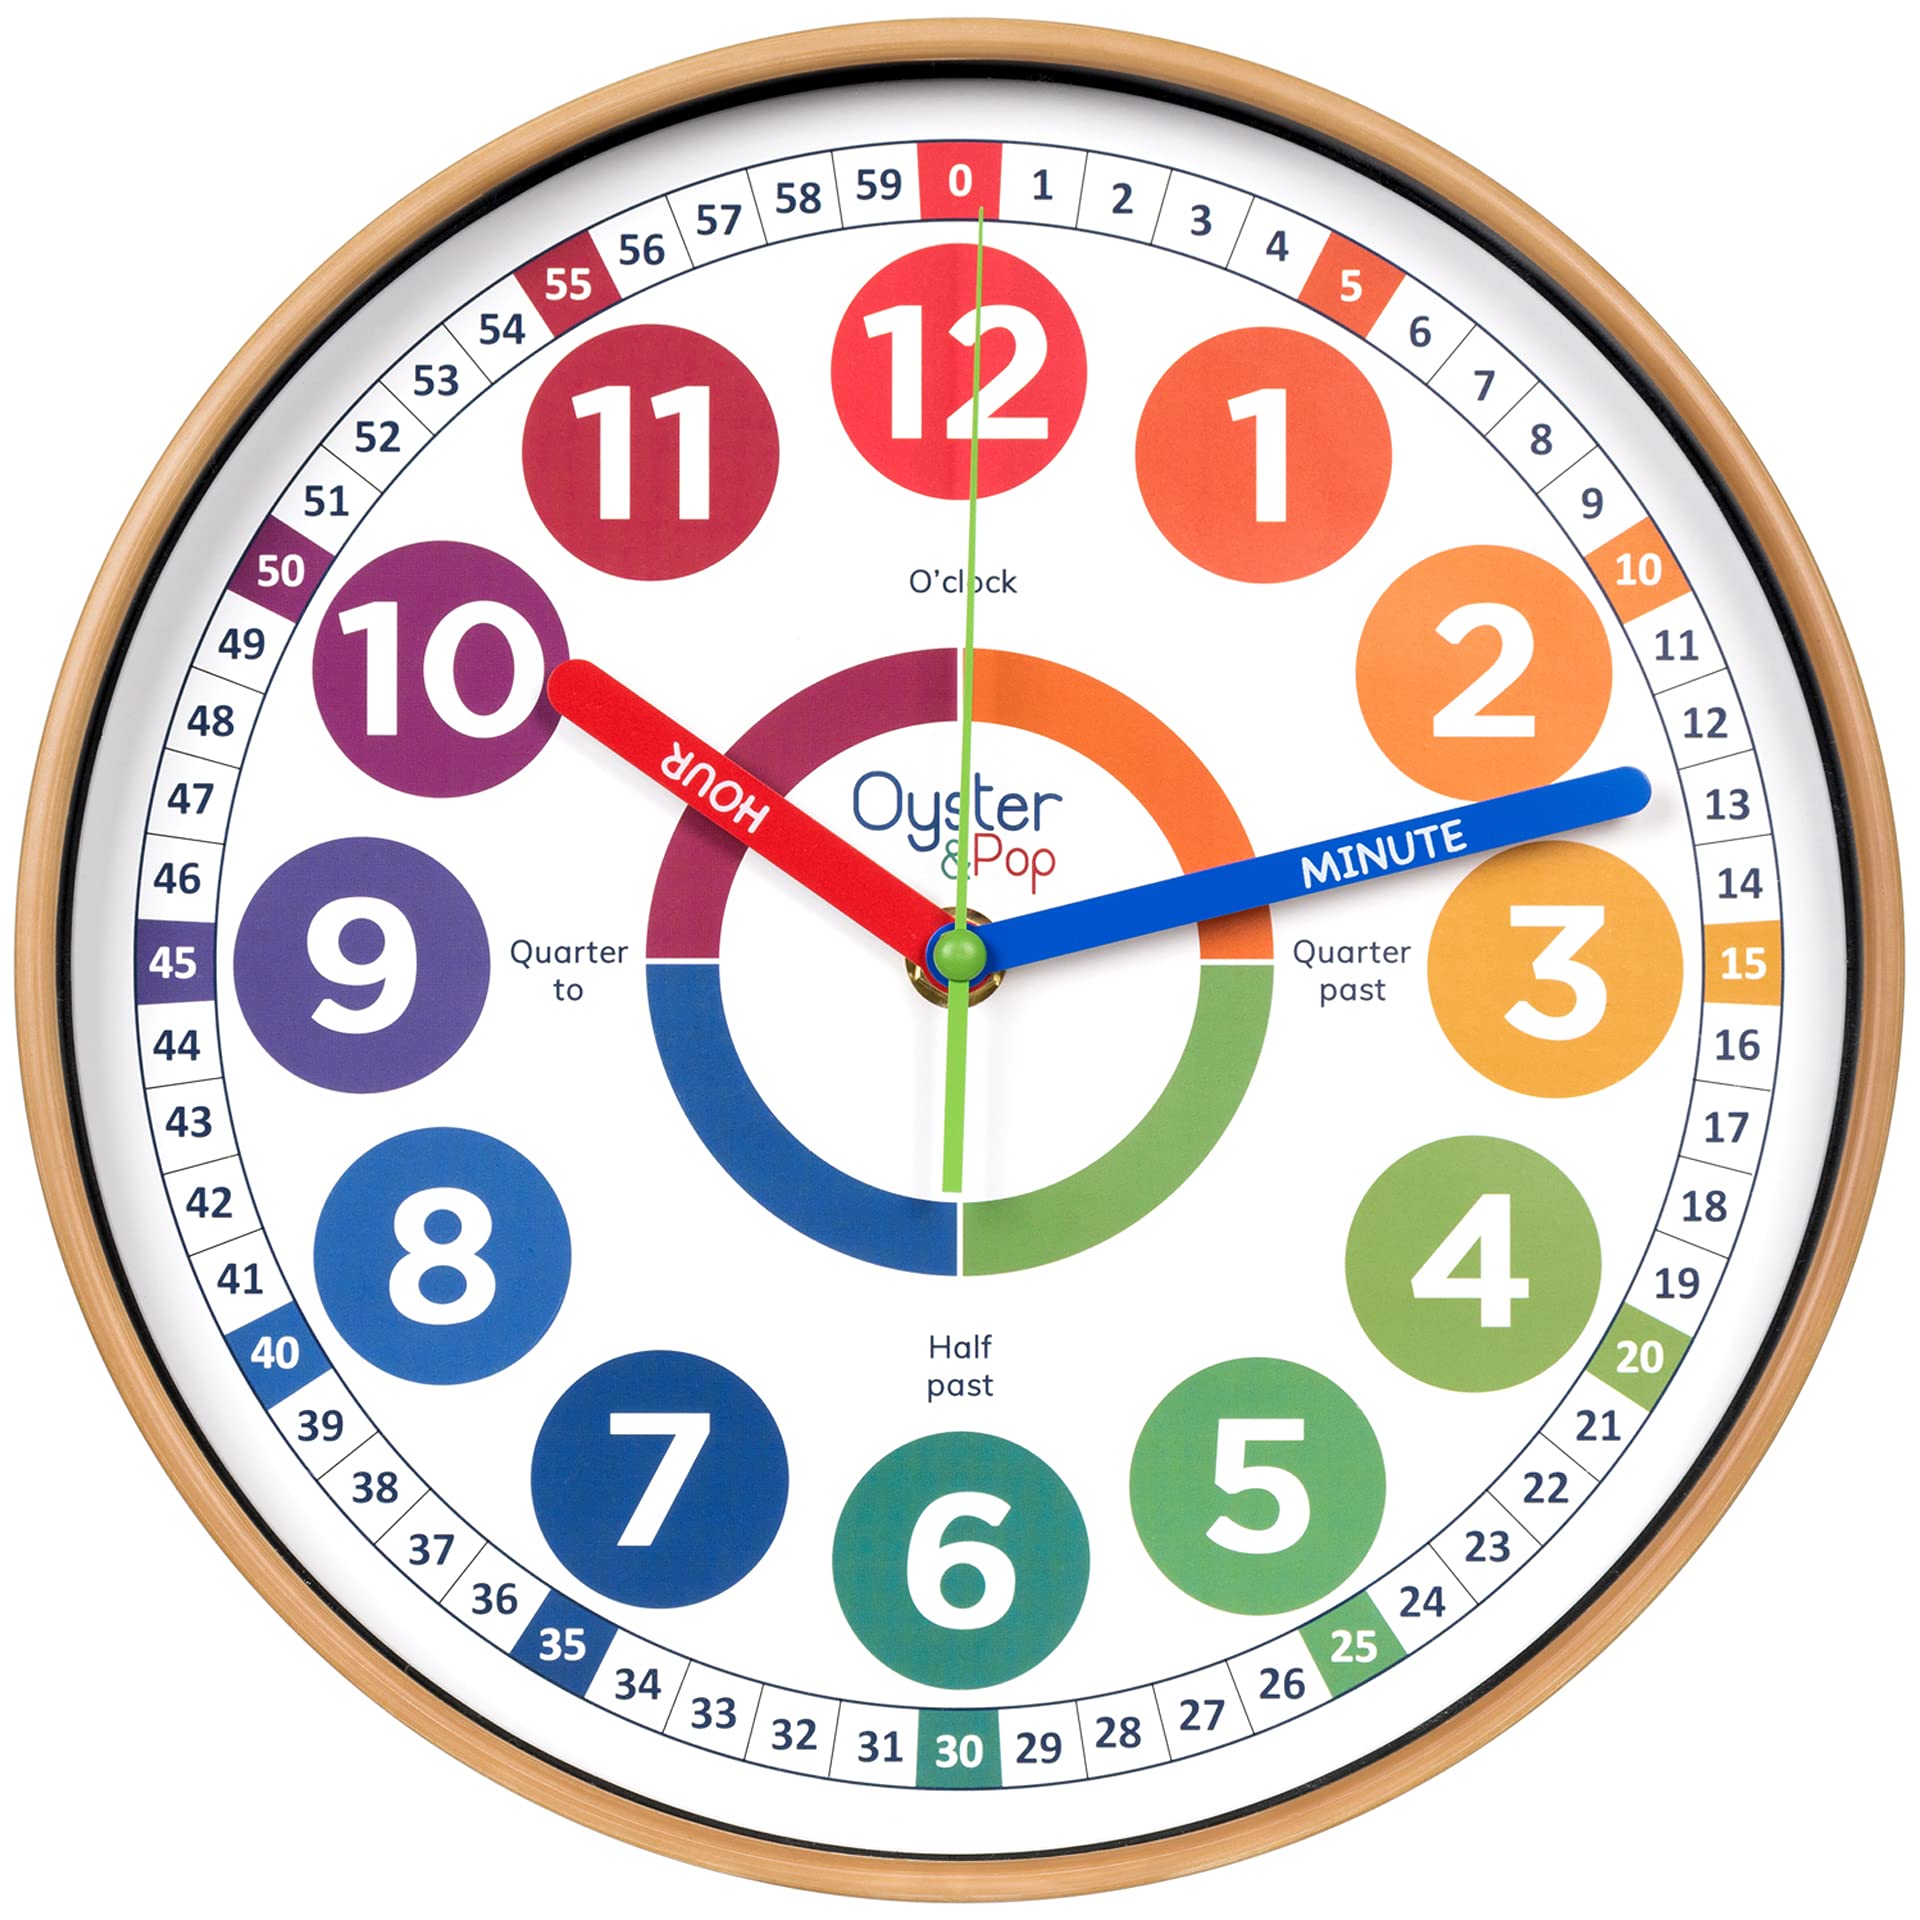 Oyster&Pop Kids Wall Clock - Learning Clock - Silent Analogue Telling Time Teaching Clock - Kids Learn to Tell Time Easily